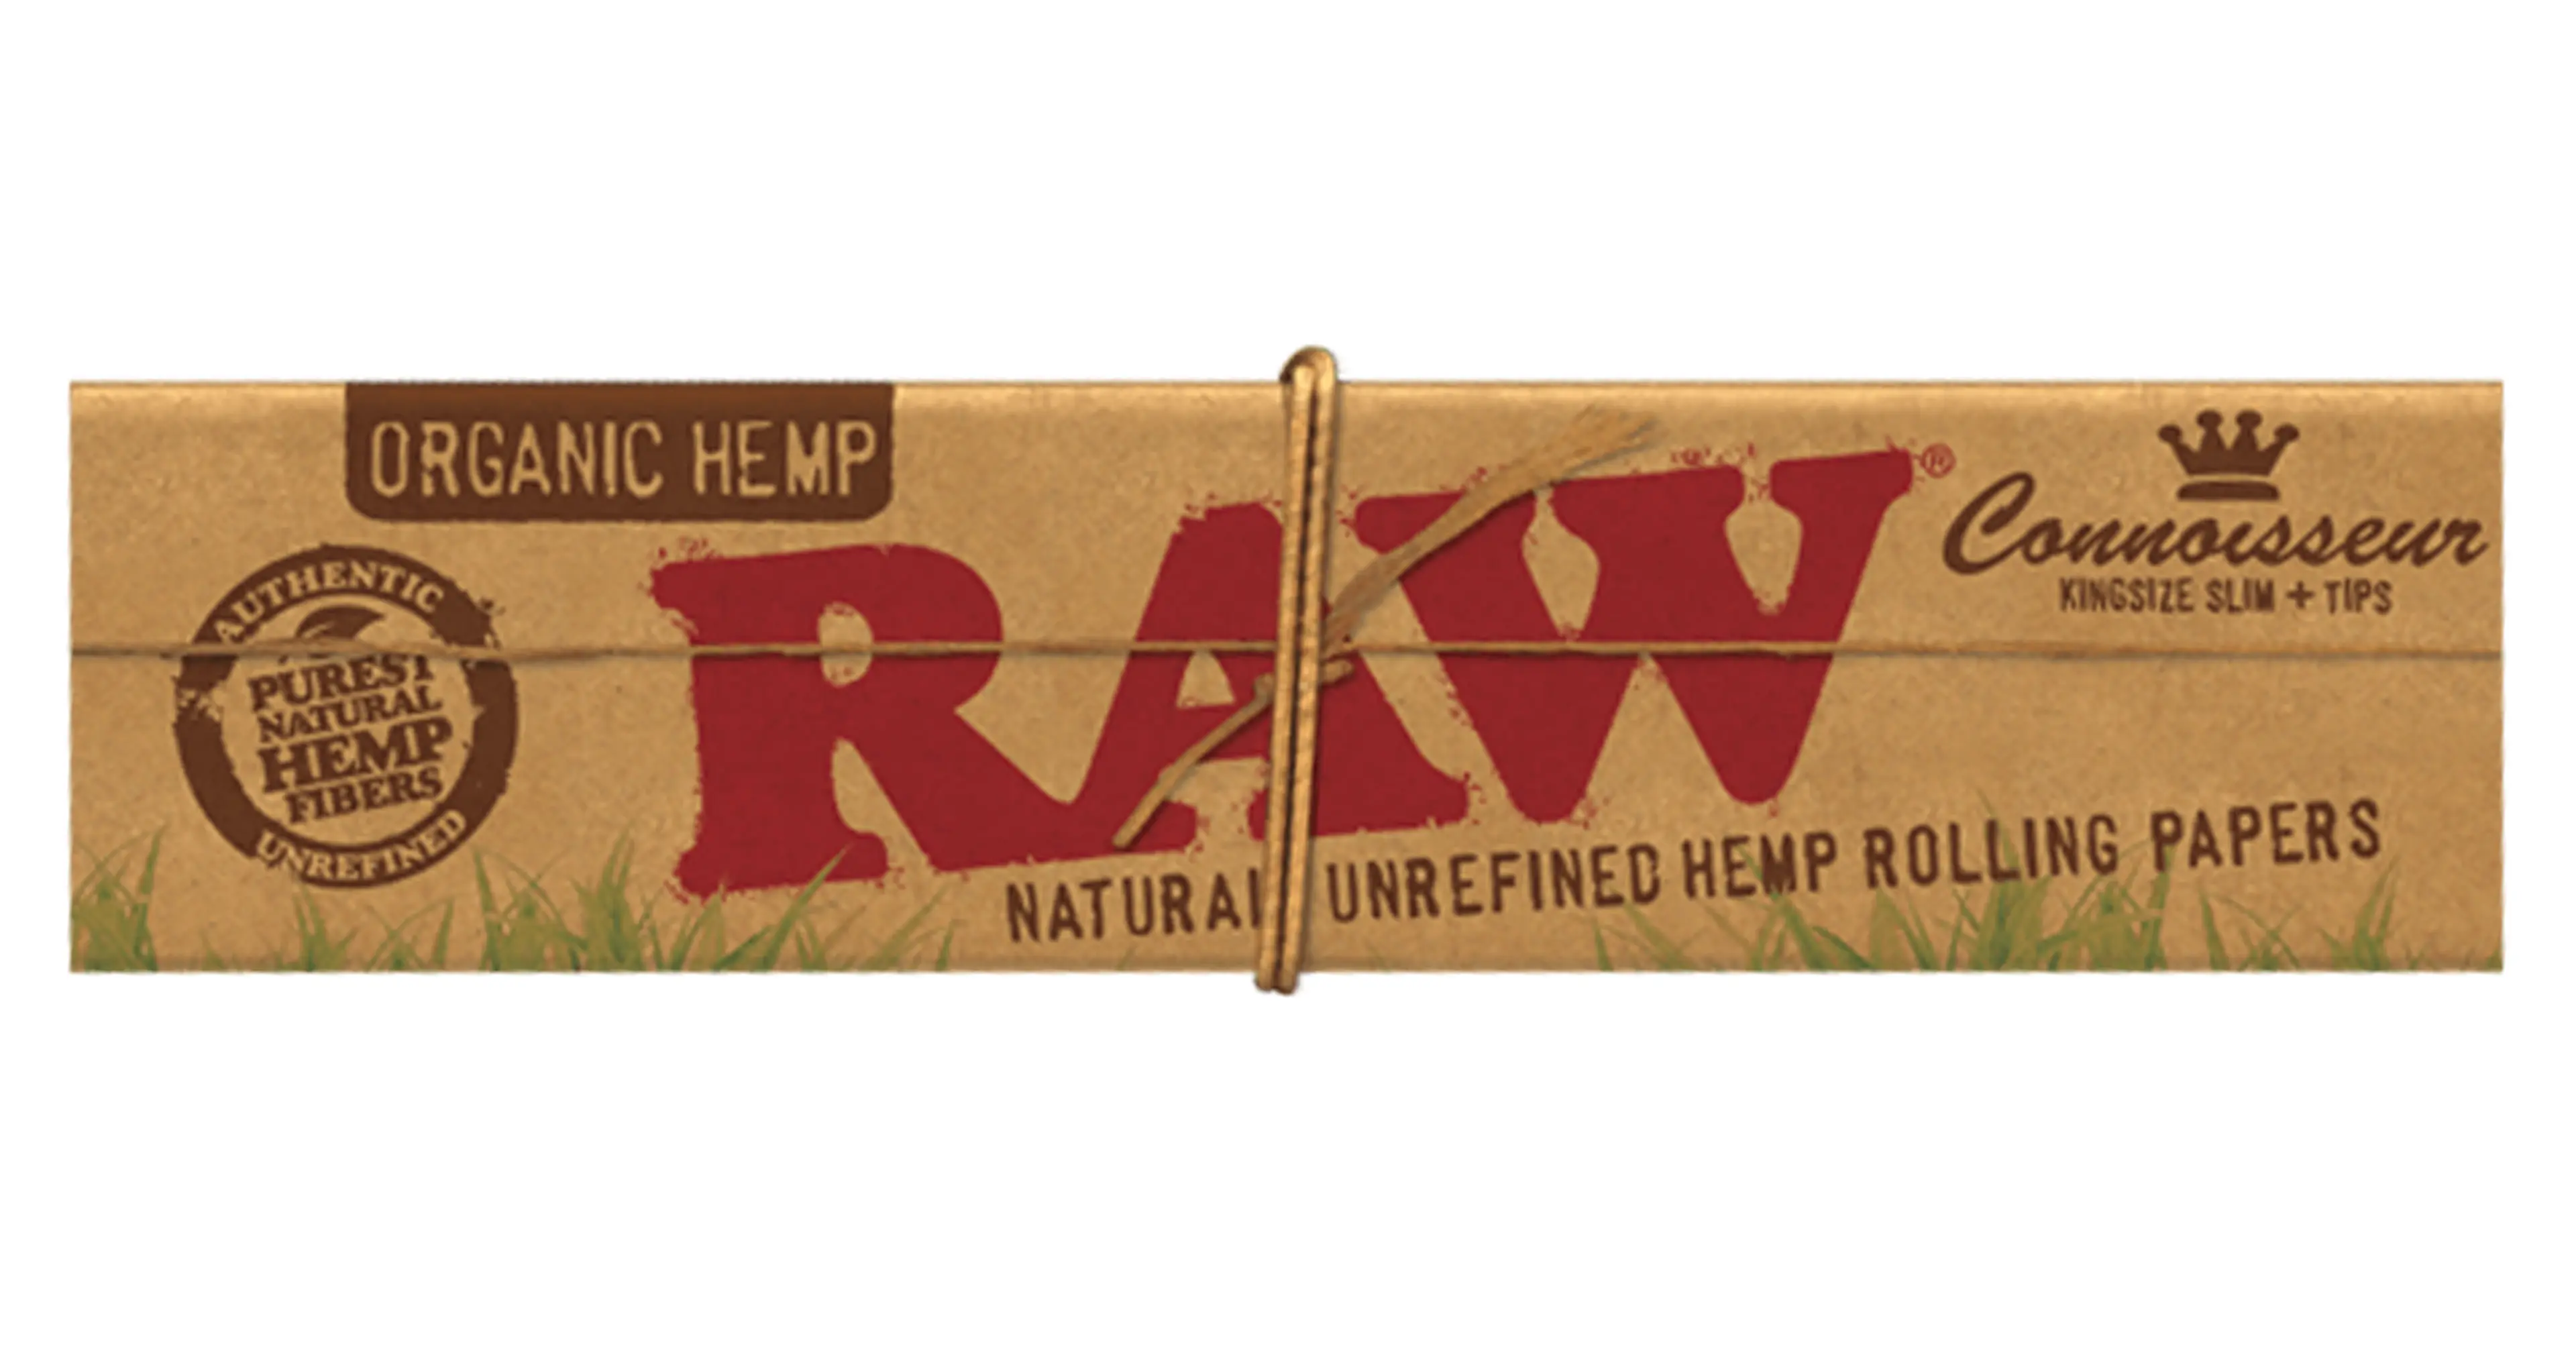 Connoisseur Kingsize Slim Organic Rolling Papers + Tips